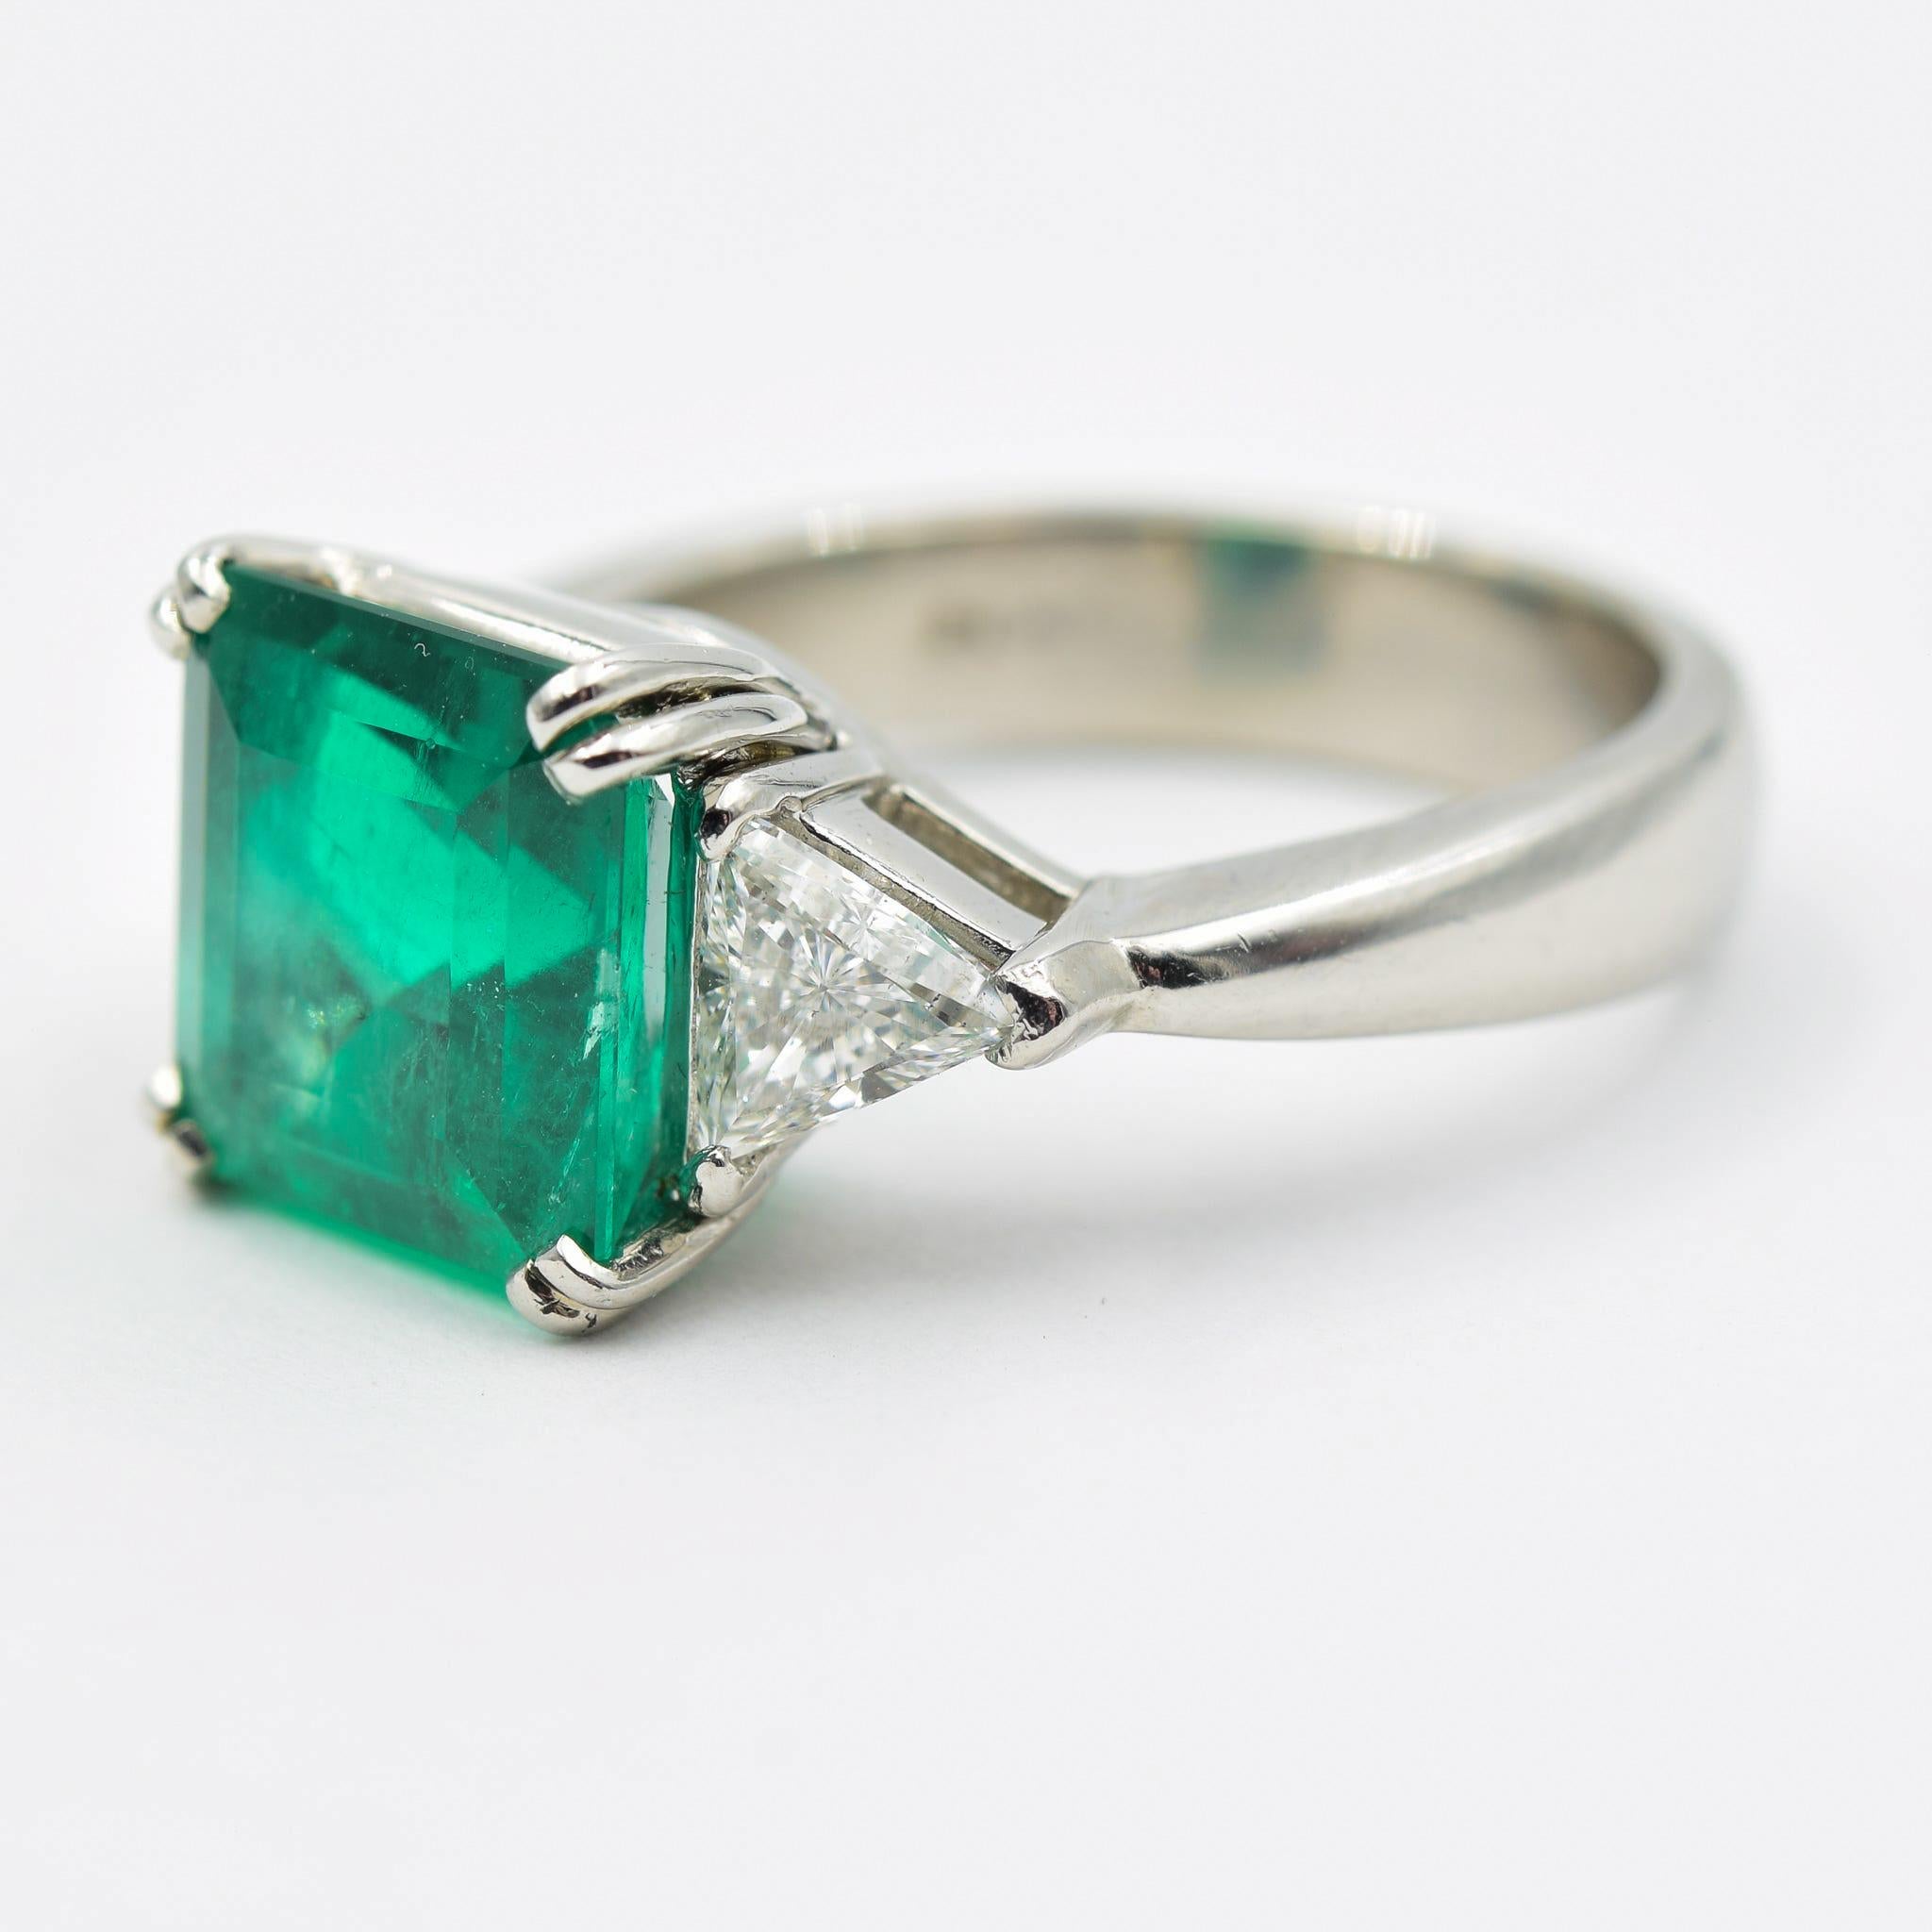 This classic emerald ring has a 3.70 carat center emerald and a trillion cut diamond on each side. This lovely piece is crafted in platinum and the emeralds are a nice quality hosting some inclusions. 
 For the value of a 3.70 carat emerald with